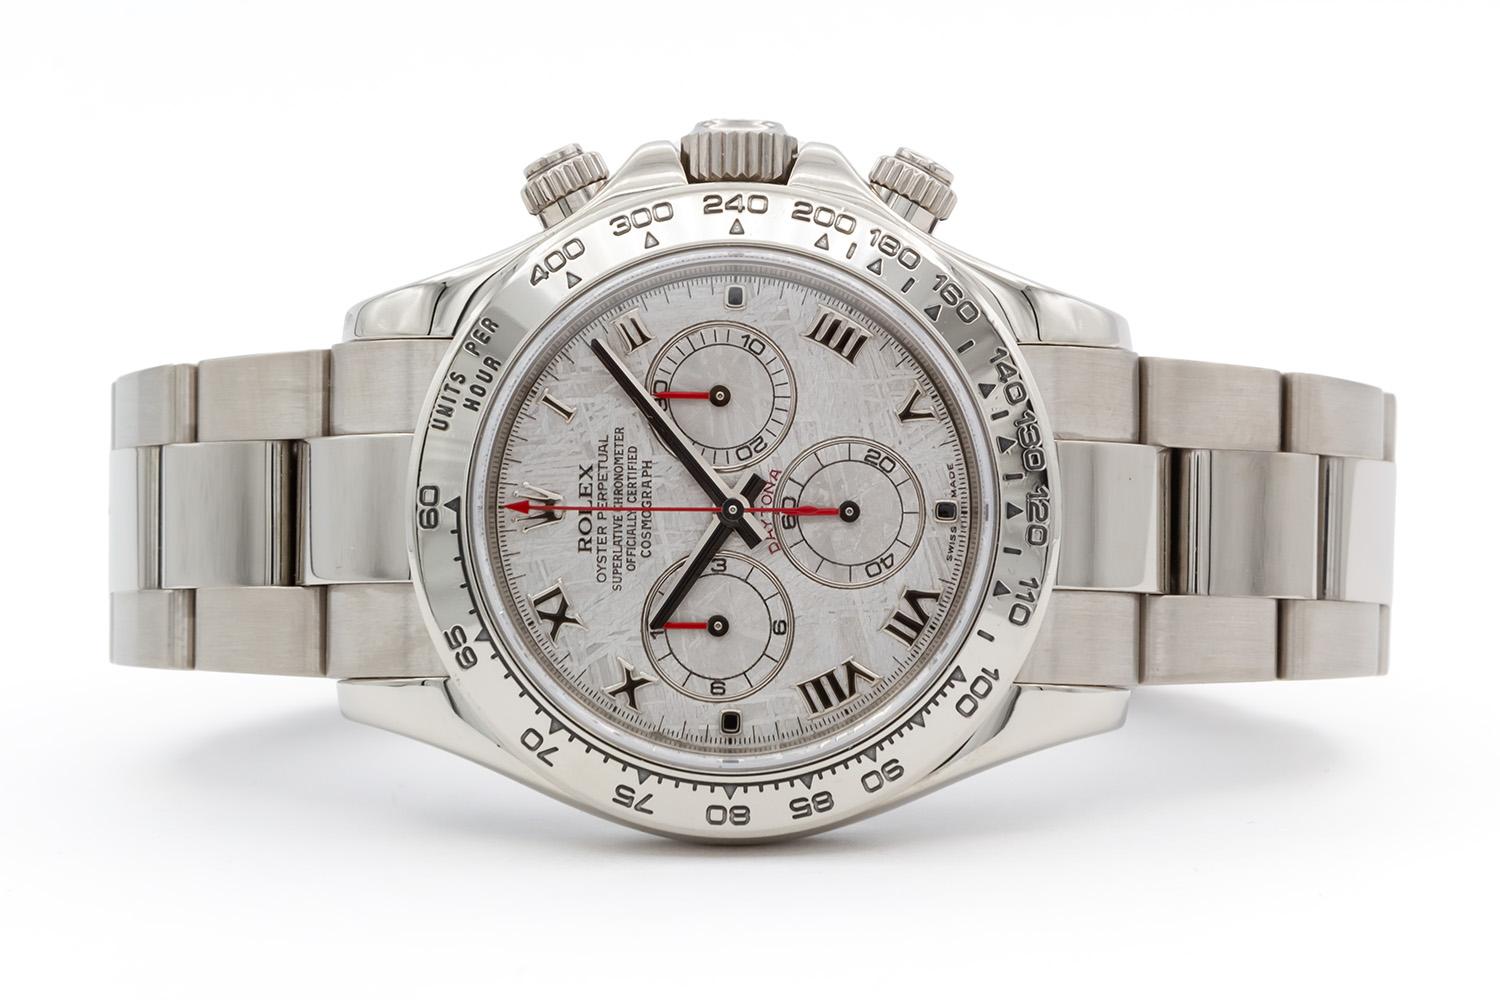 We are pleased to offer this 2006 18k White Gold Rolex Daytona Chronograph 116509. The Daytona will always be one of the most coveted Rolex watches and this configuration tops the charts for many collectors. It features the rare Rolex meteorite